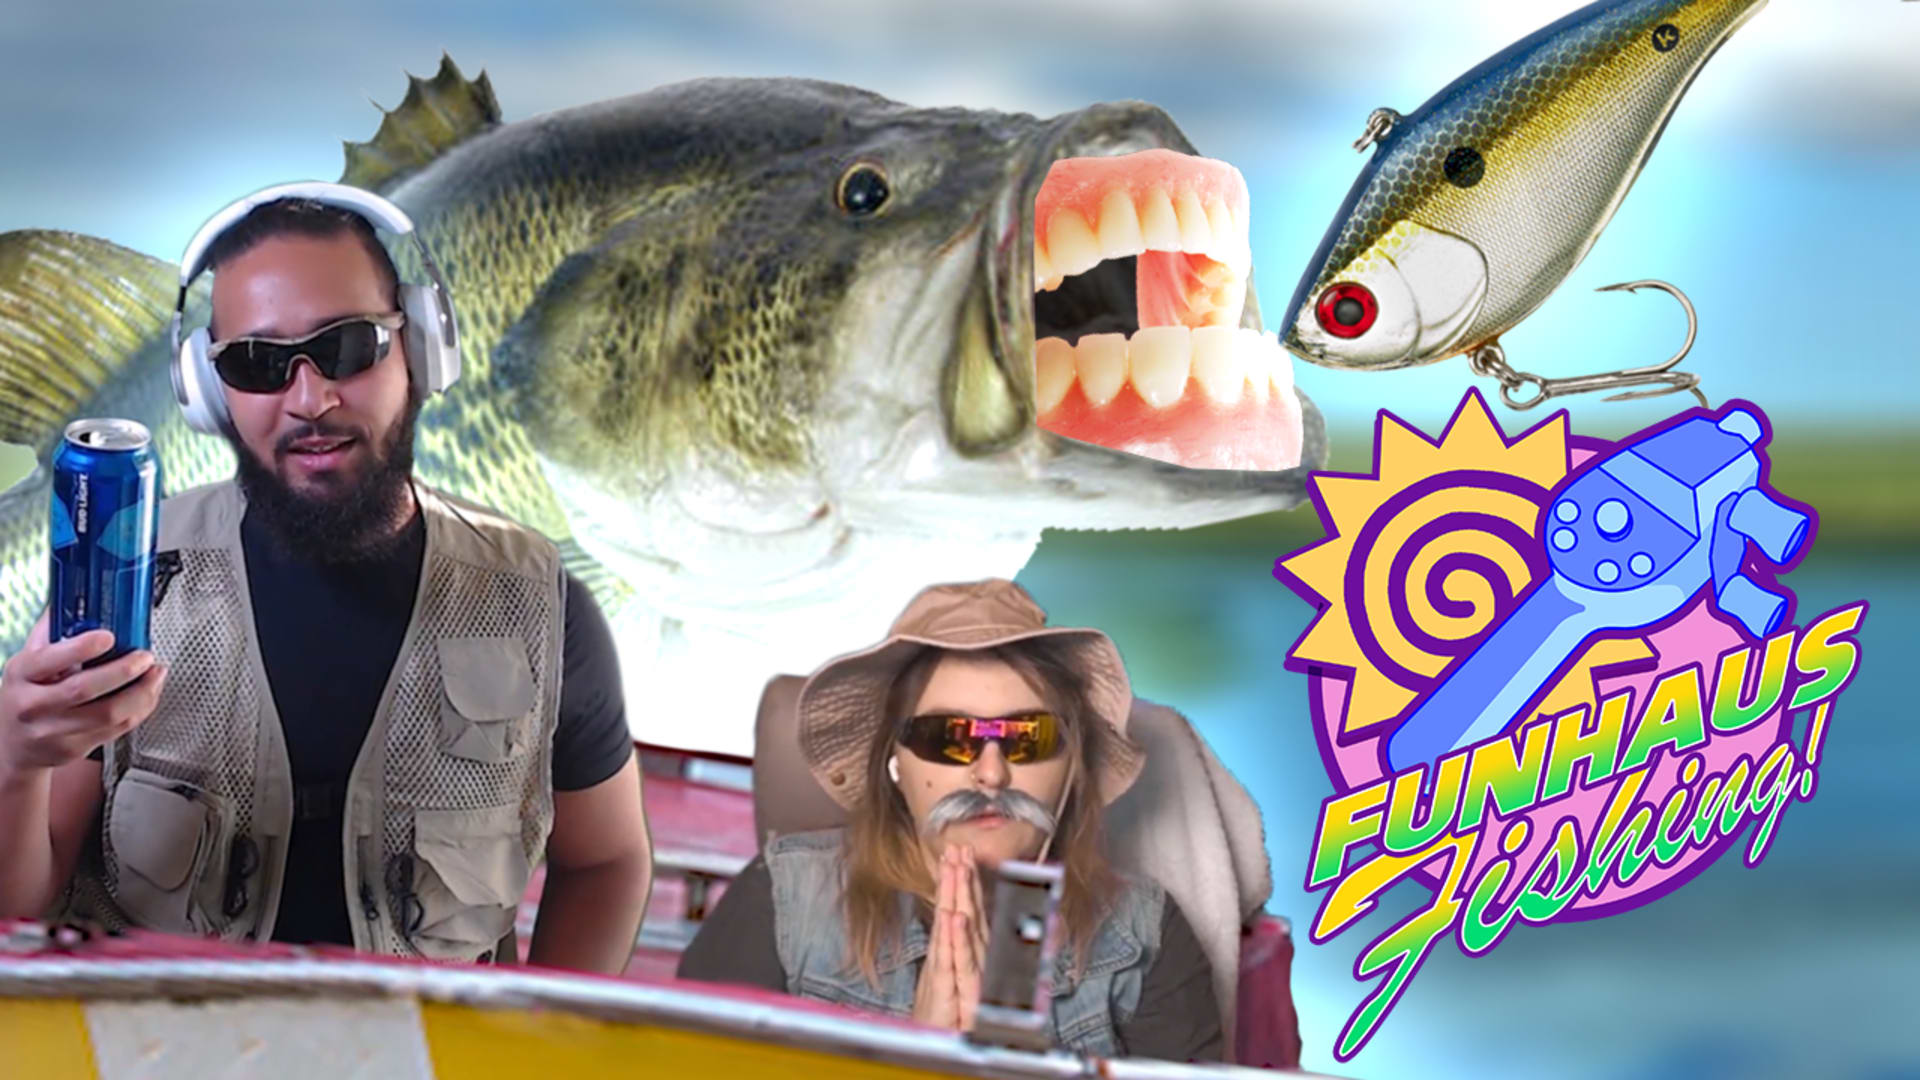 We are HOOKED on SEGA Bass Fishing - Tournament Part 2 - Rooster Teeth